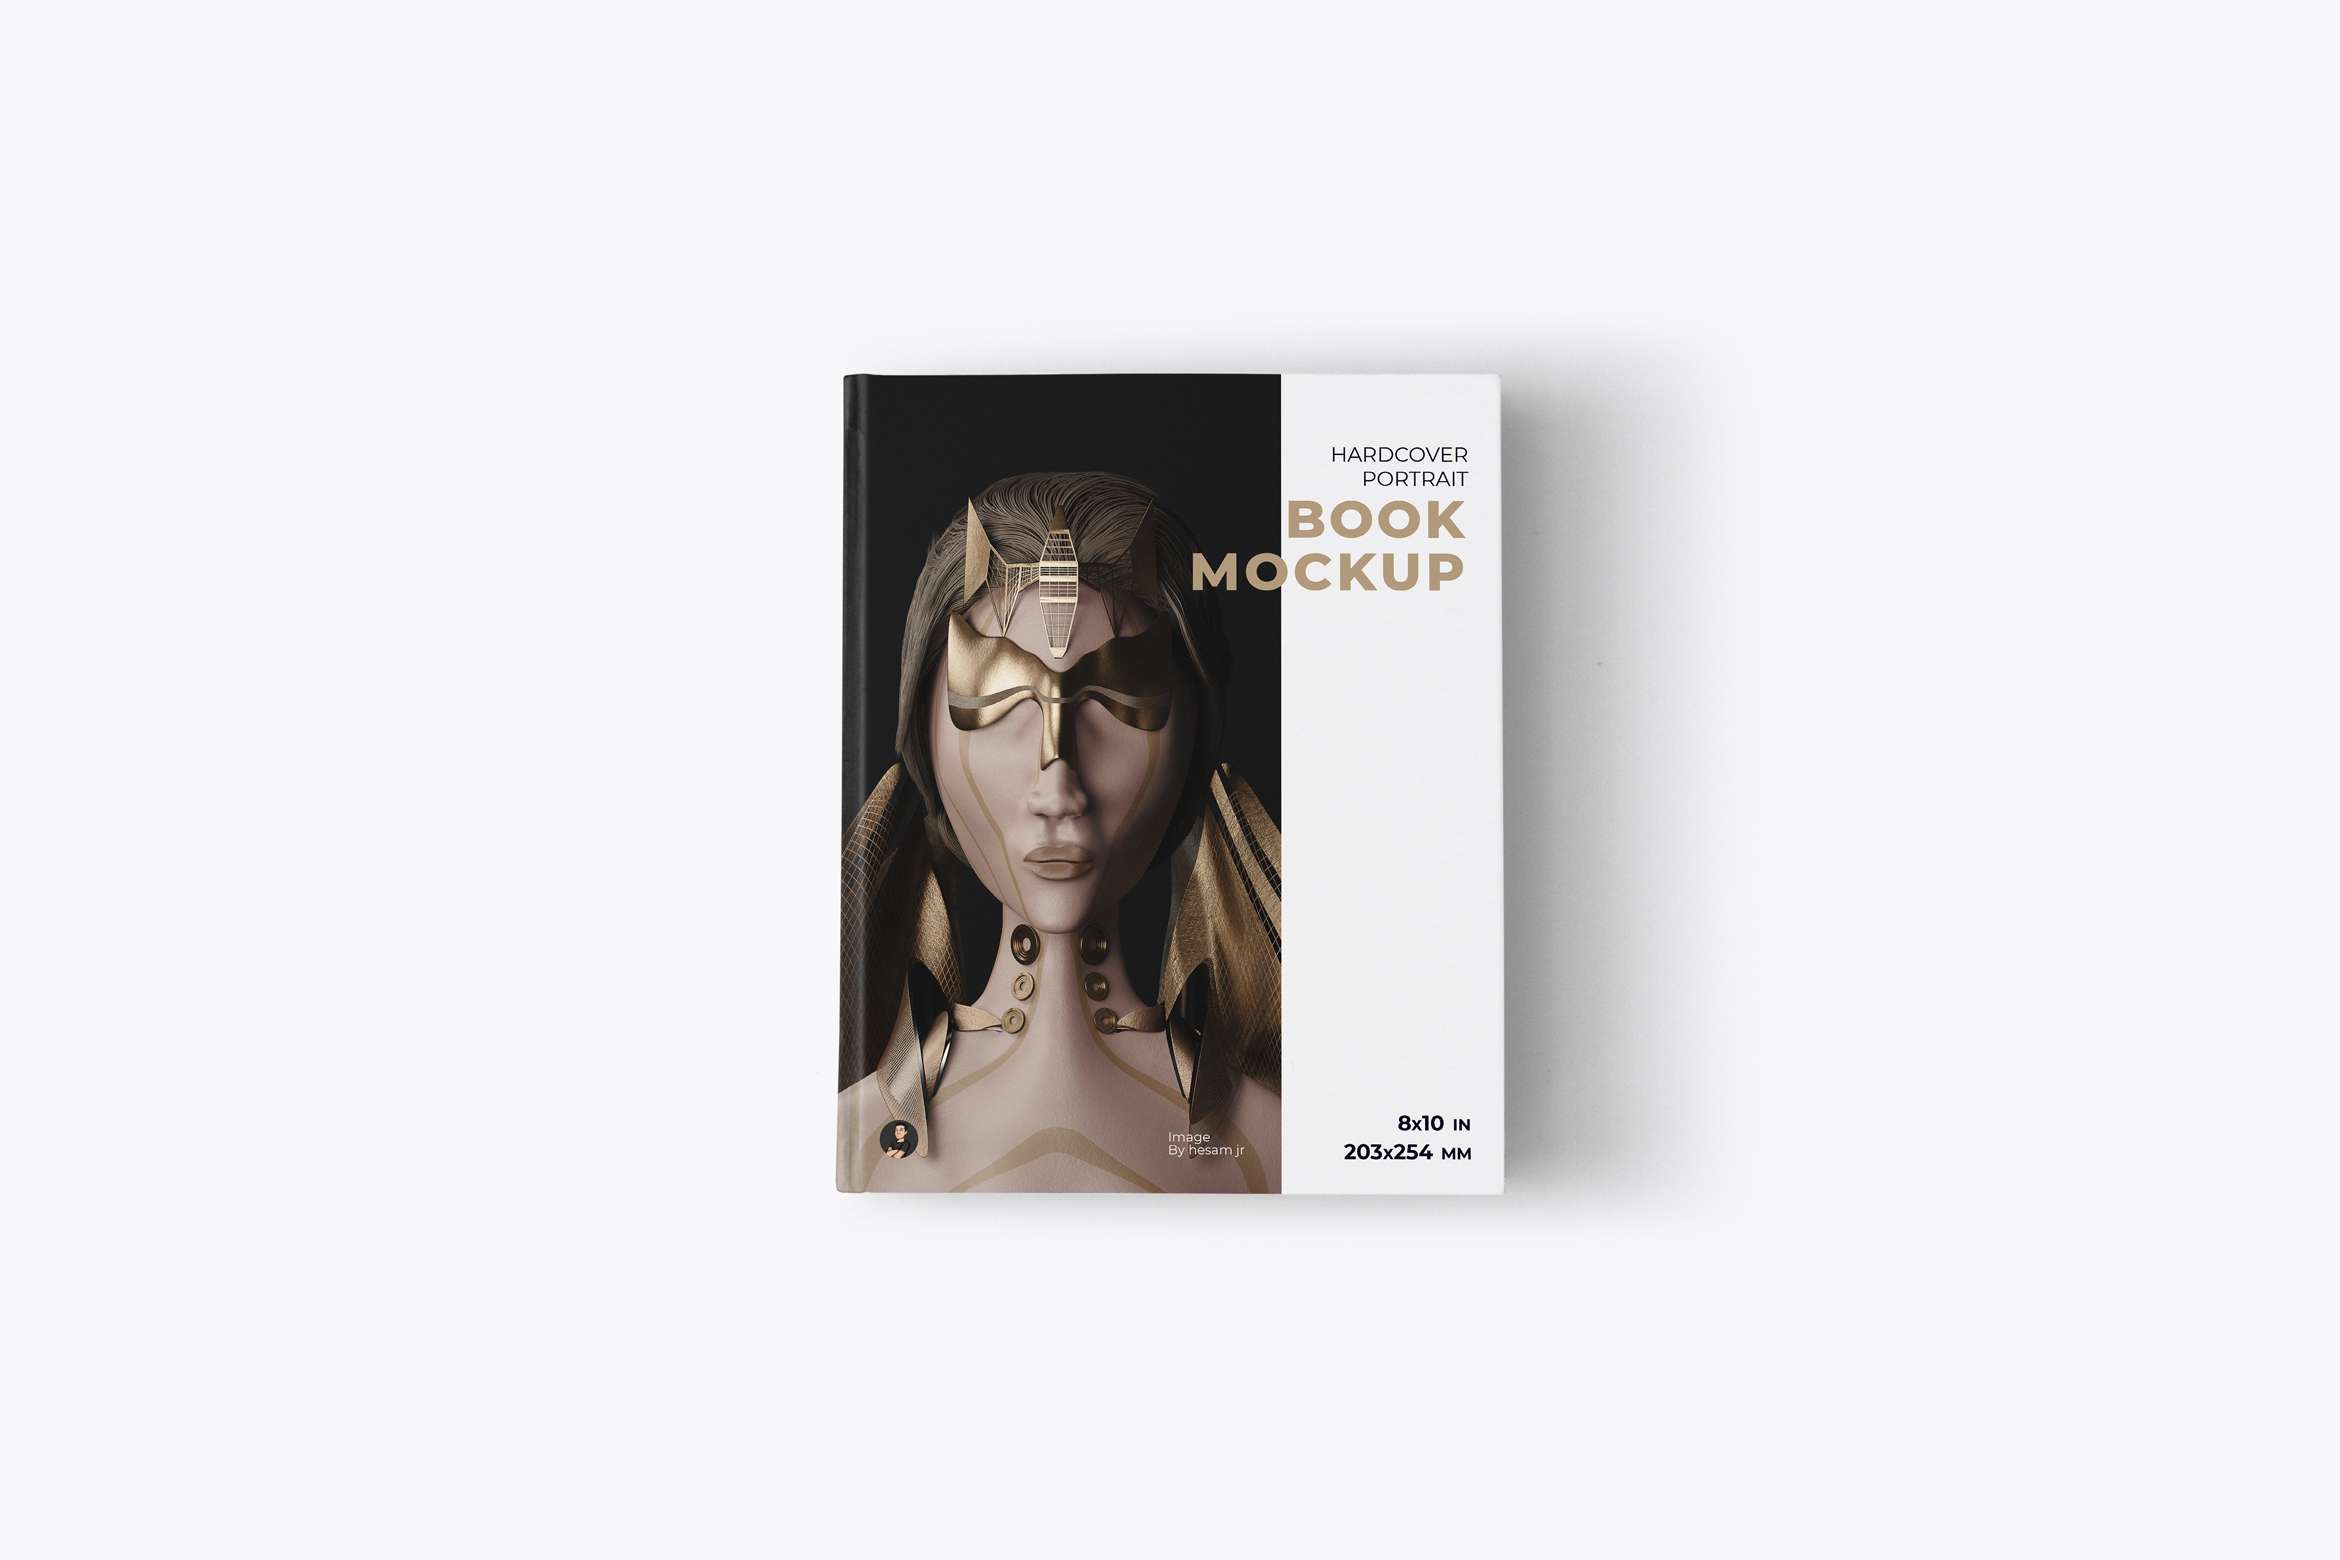 Front-back Hardcover Book Mockup - 8x10 in